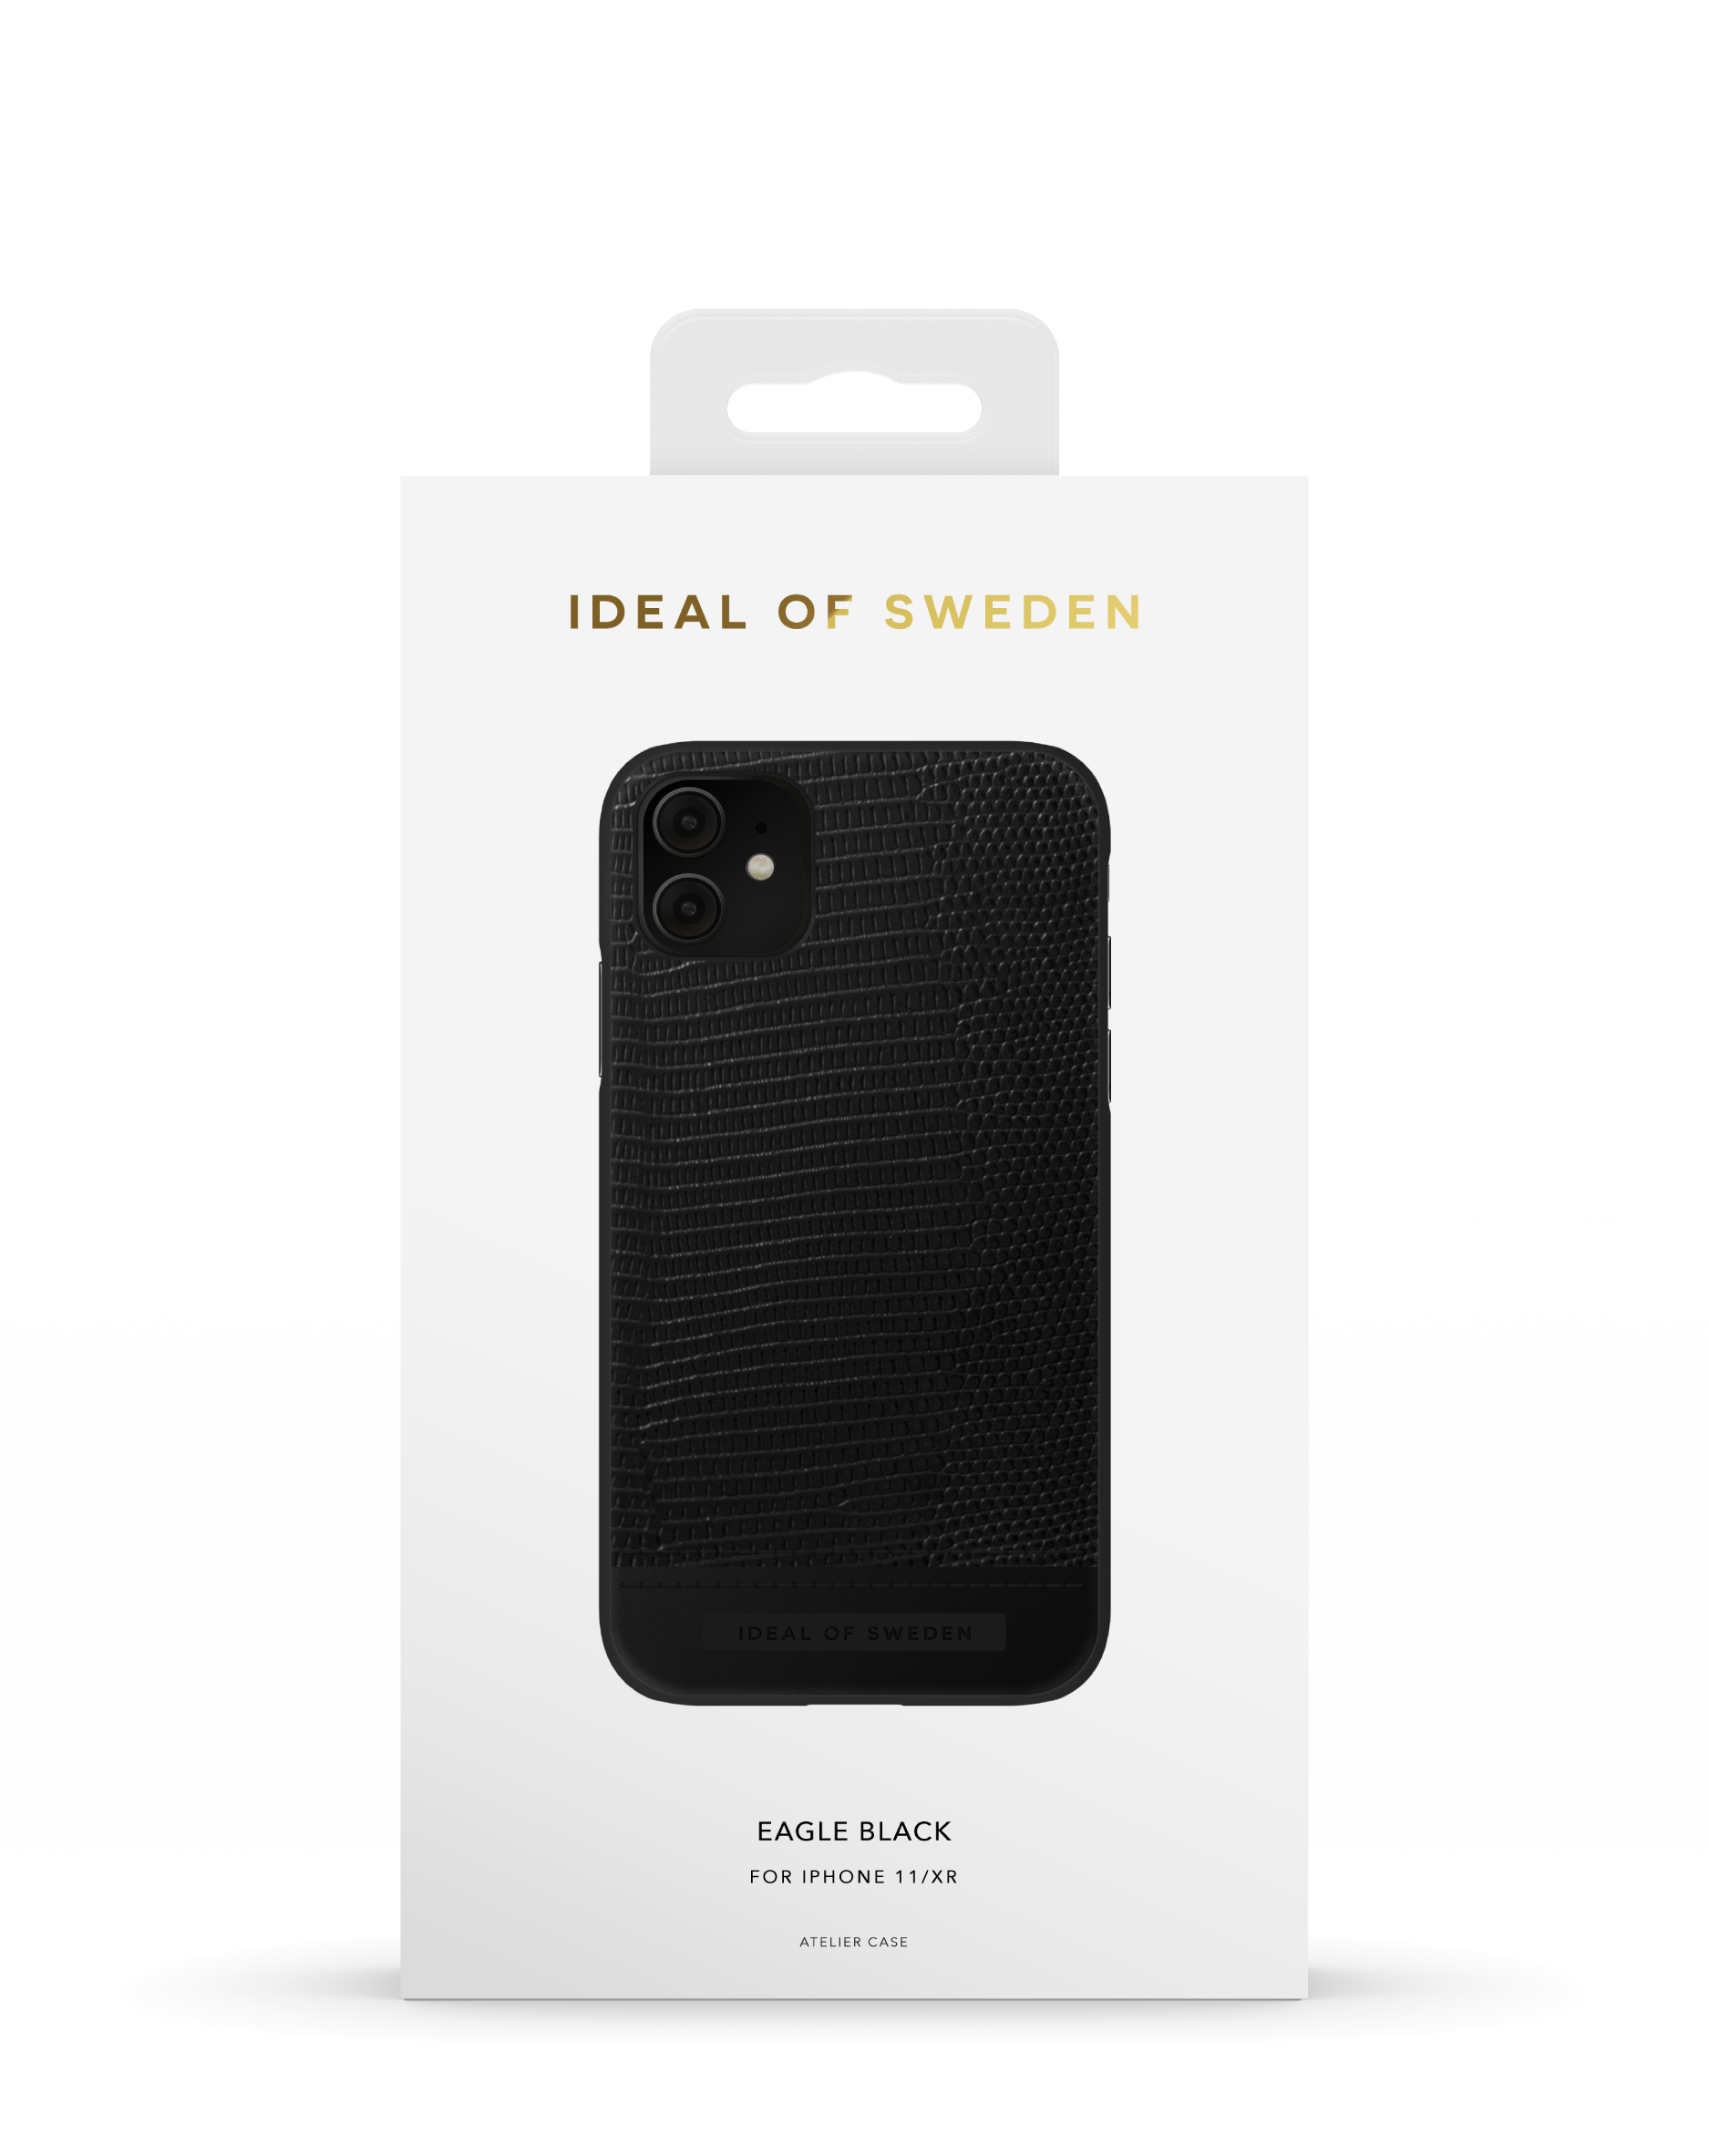 IDEAL OF IDACAW20-1961-229, iPhone 11, SWEDEN Apple, Eagle Backcover, Black XR, iPhone